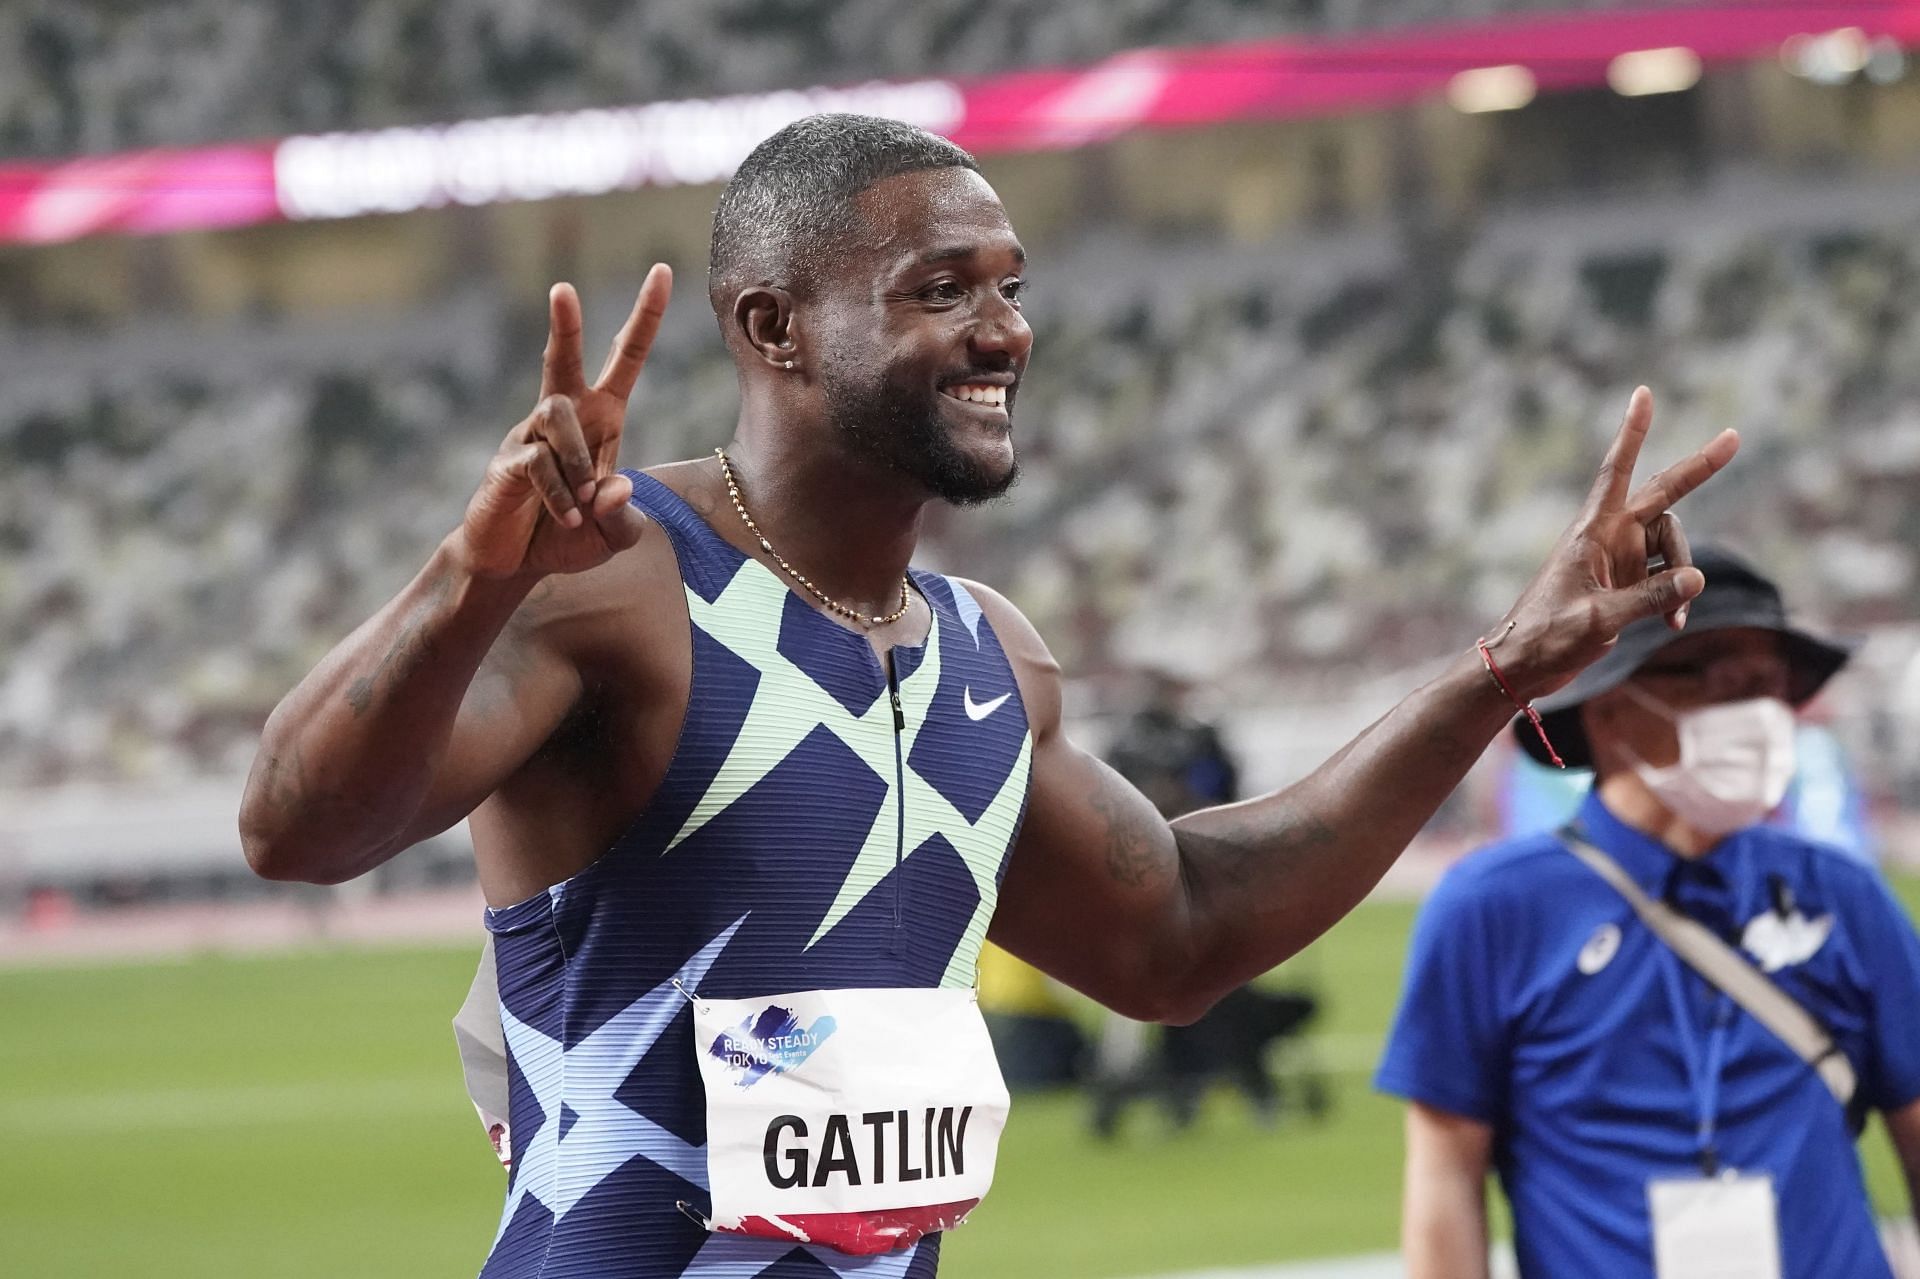 Justin Gatlin secured a gold medal in the 100m at the 2004 Olympics in Athens, Greece.